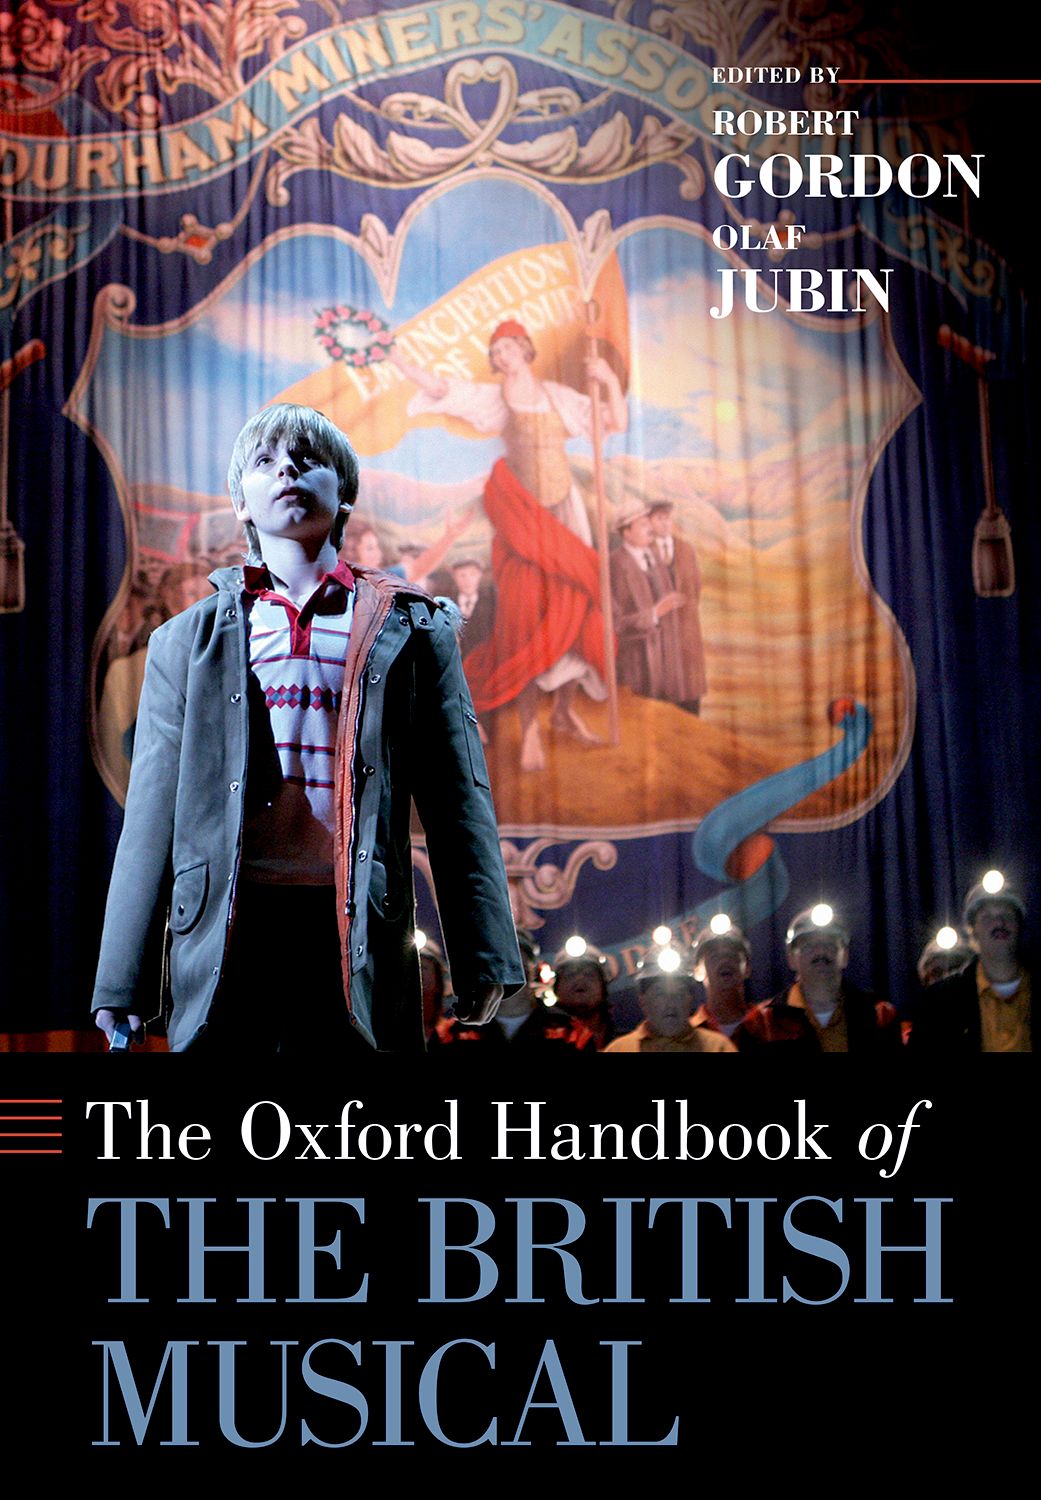 The Oxford Handbook of the British Musical: Reference